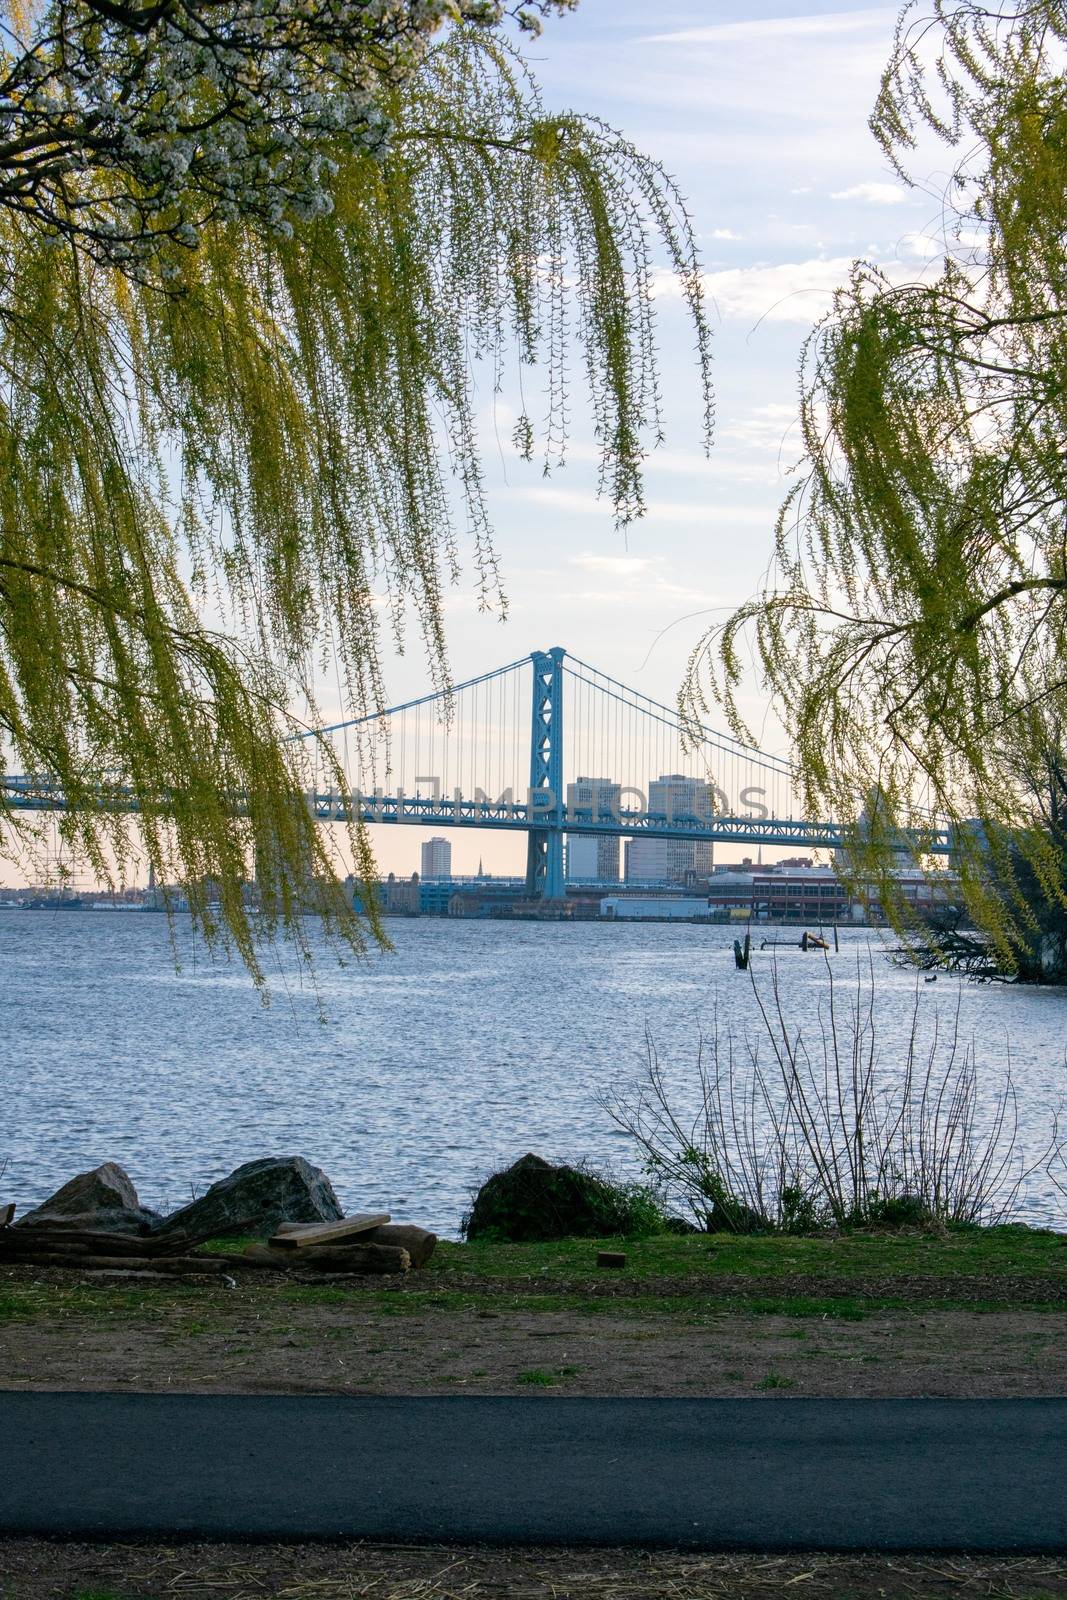 Looking Through Bright Green Trees at the Ben Franklin Bridge From the Newly Renovated Penn Treaty Park